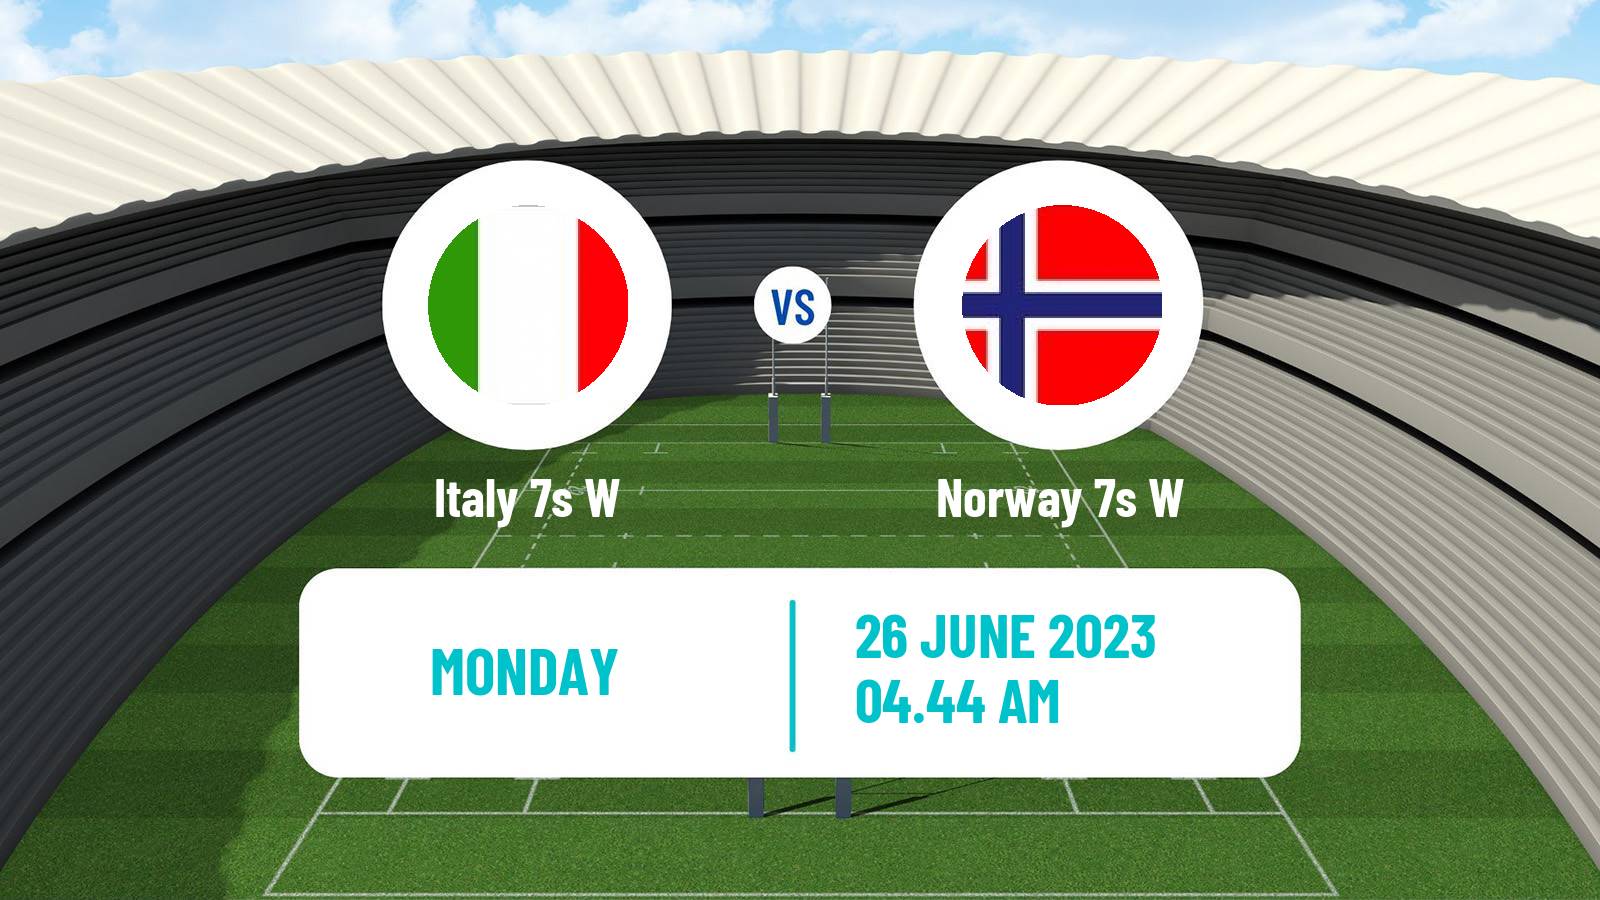 Rugby union European Games 7s Rugby Women Italy 7s W - Norway 7s W